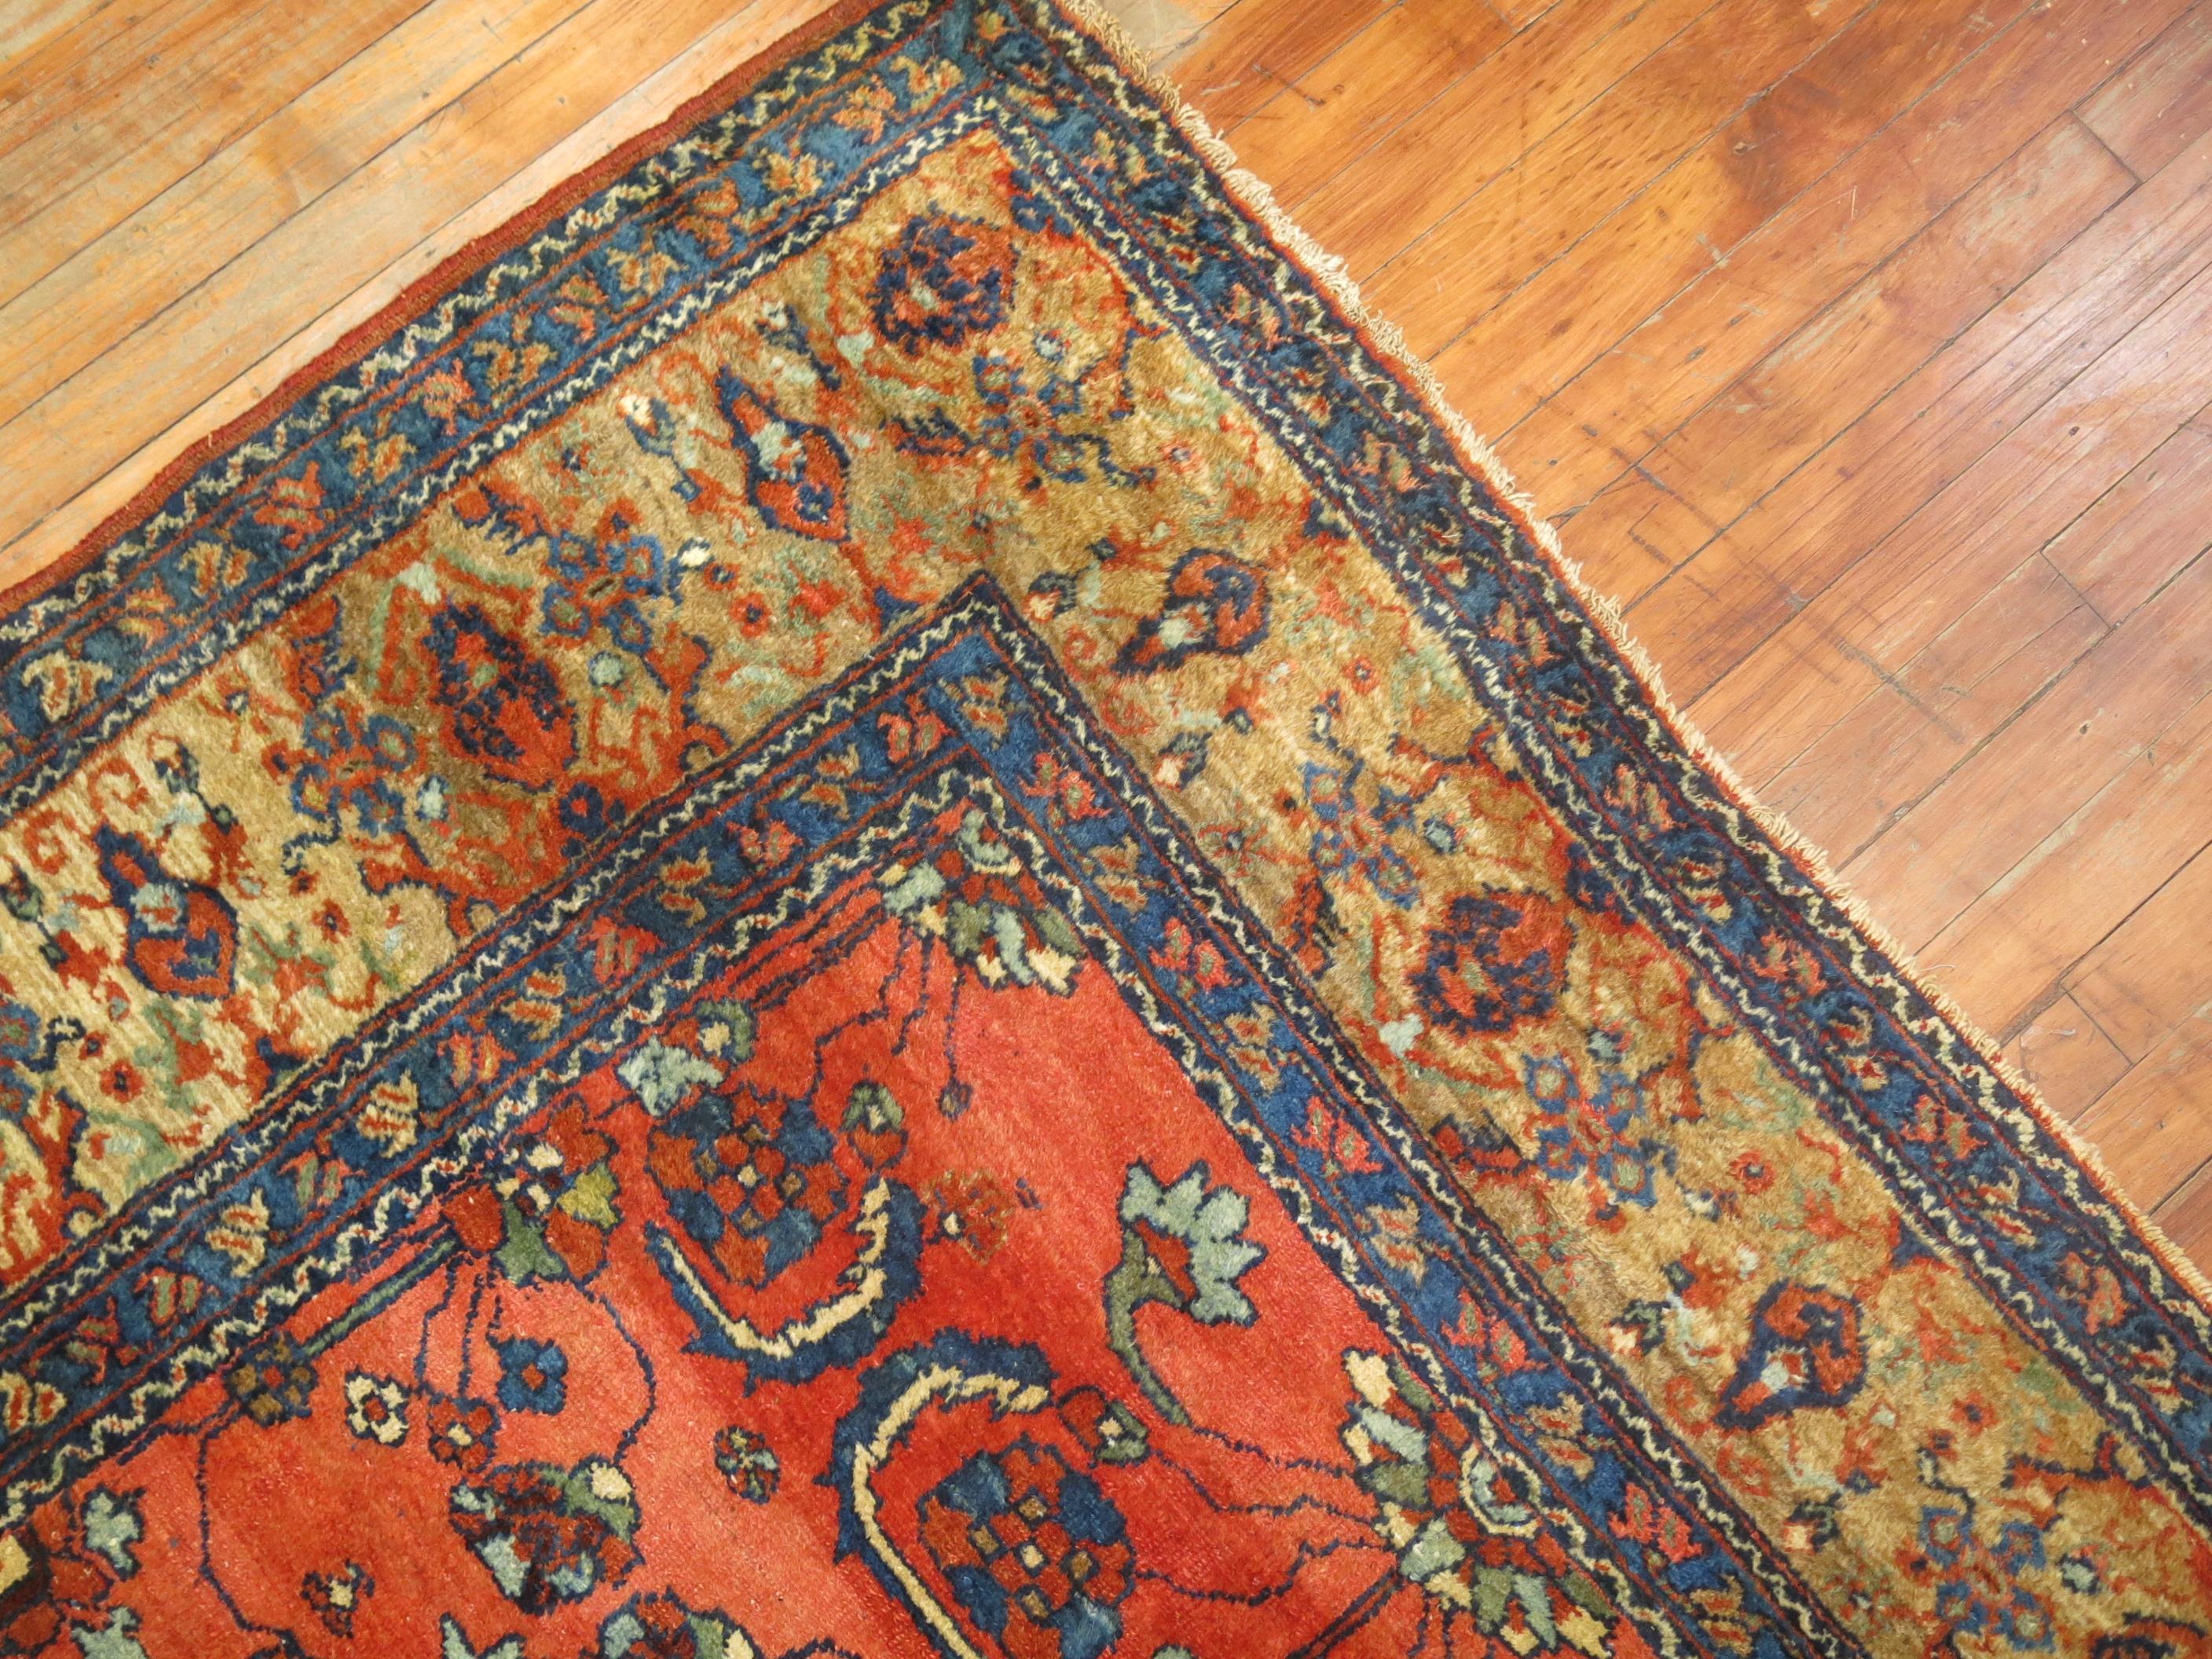 Rust field vintage decorative Persian rug from Hamadan village located in northwest Persian.

5'3'' x 6'2''